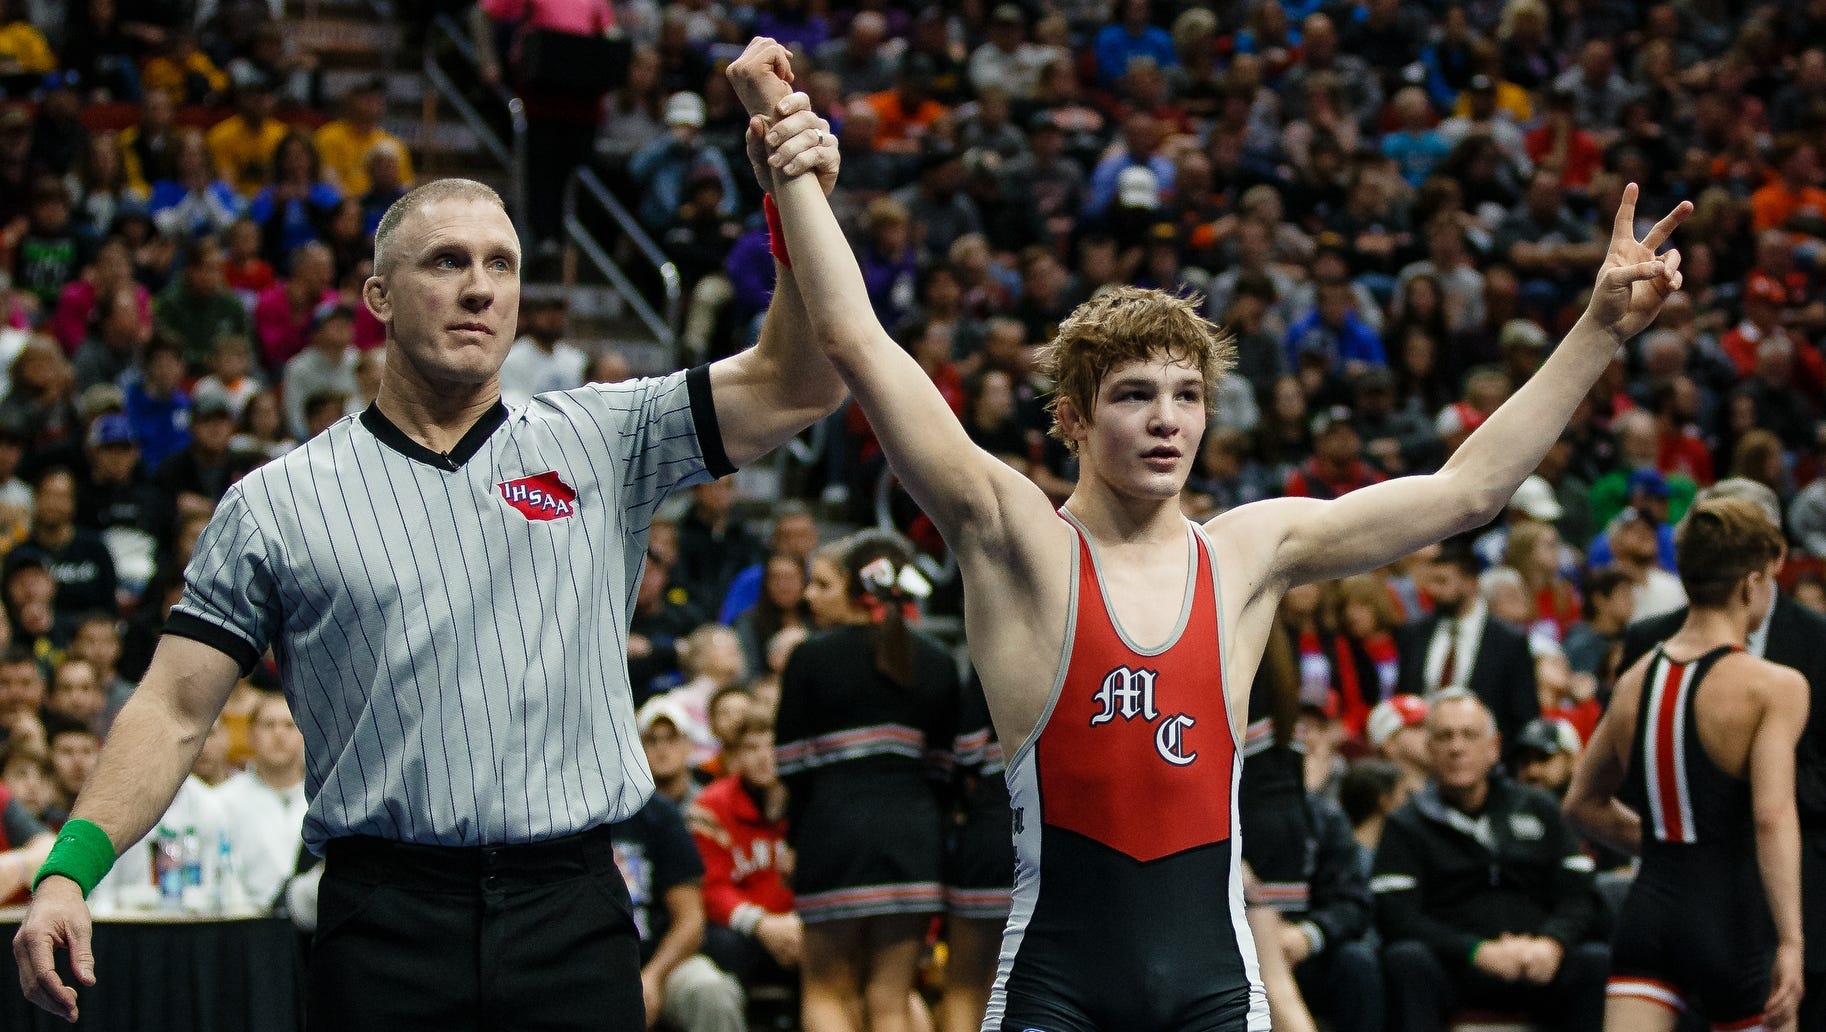 High school wrestling Eight Iowa preps from 2020, 2021 classes to